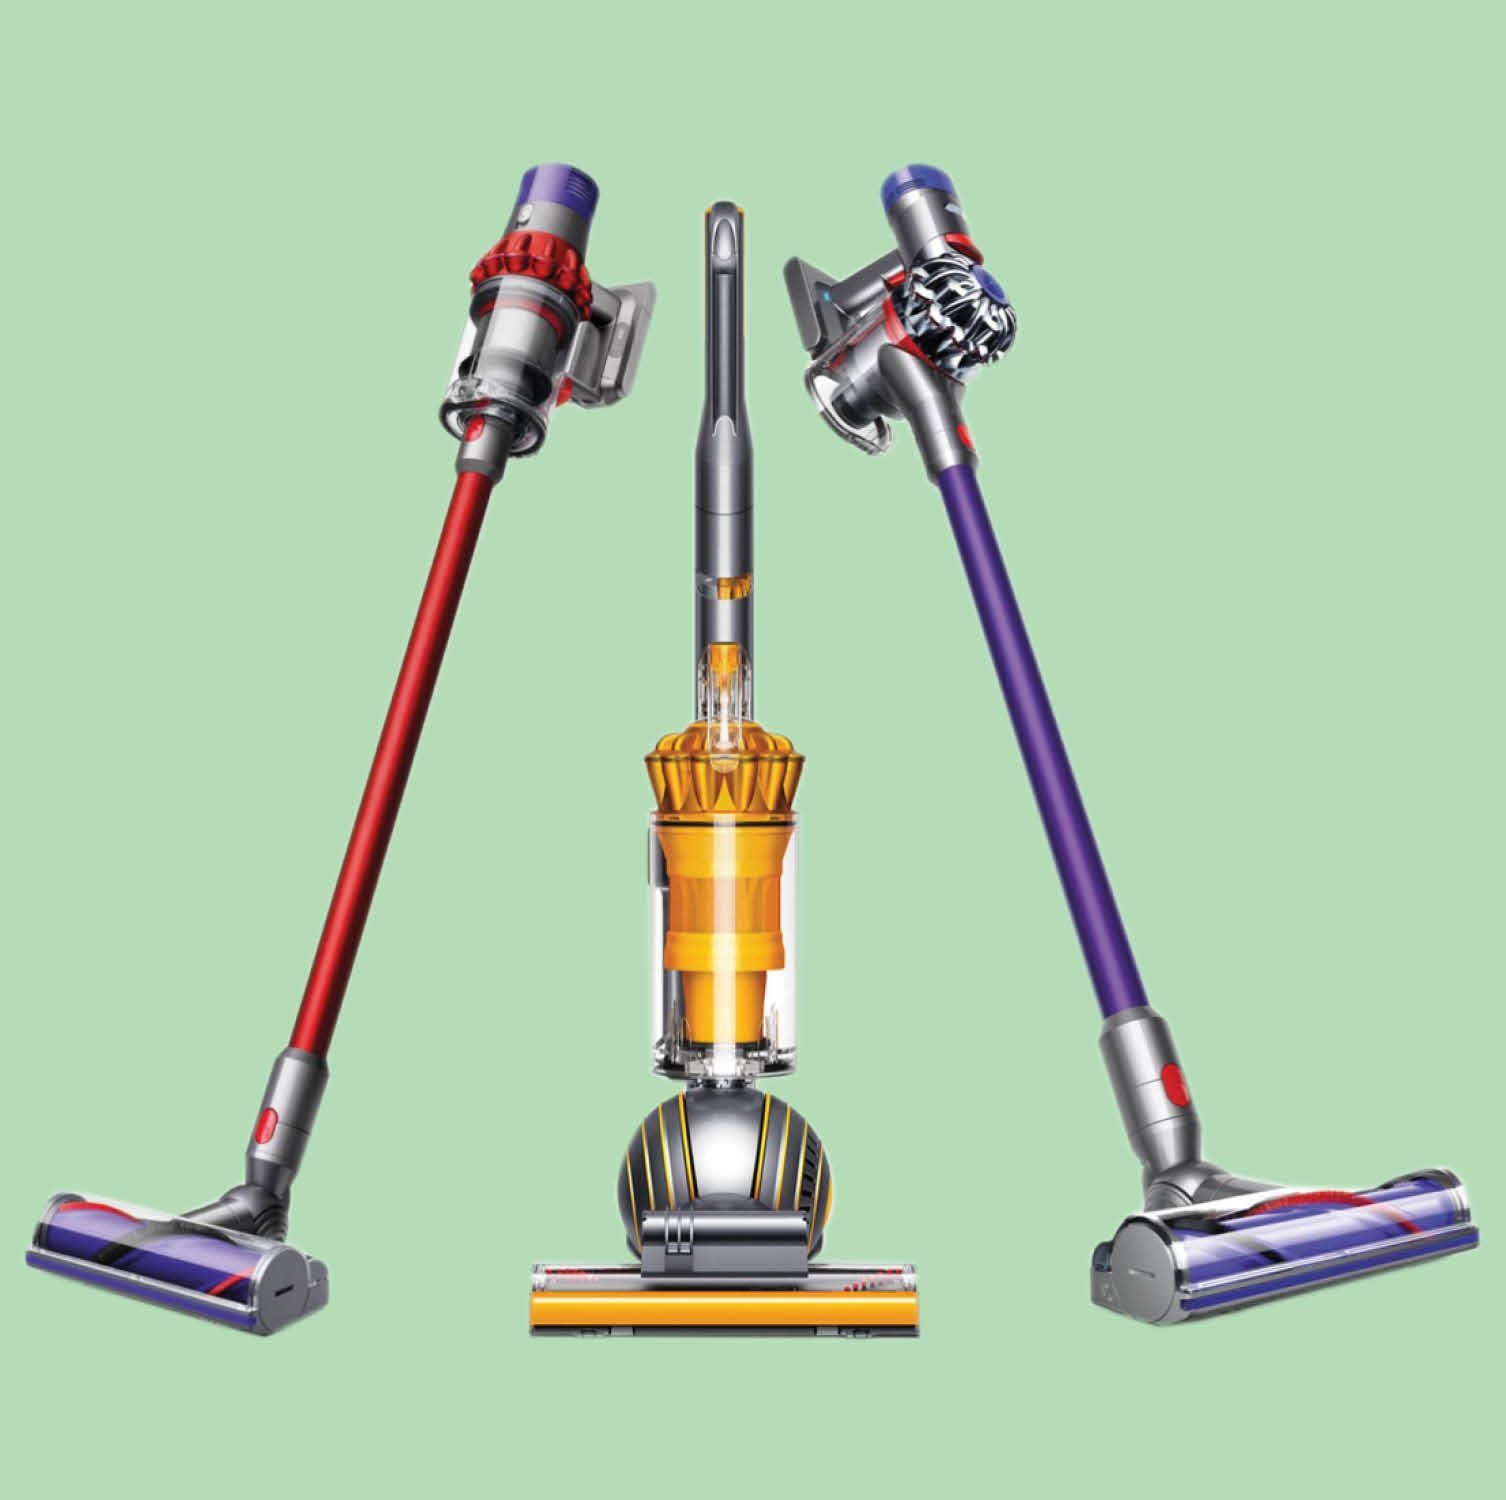 The Dyson V10 Stick Vacuum Is $200 off for Black Friday